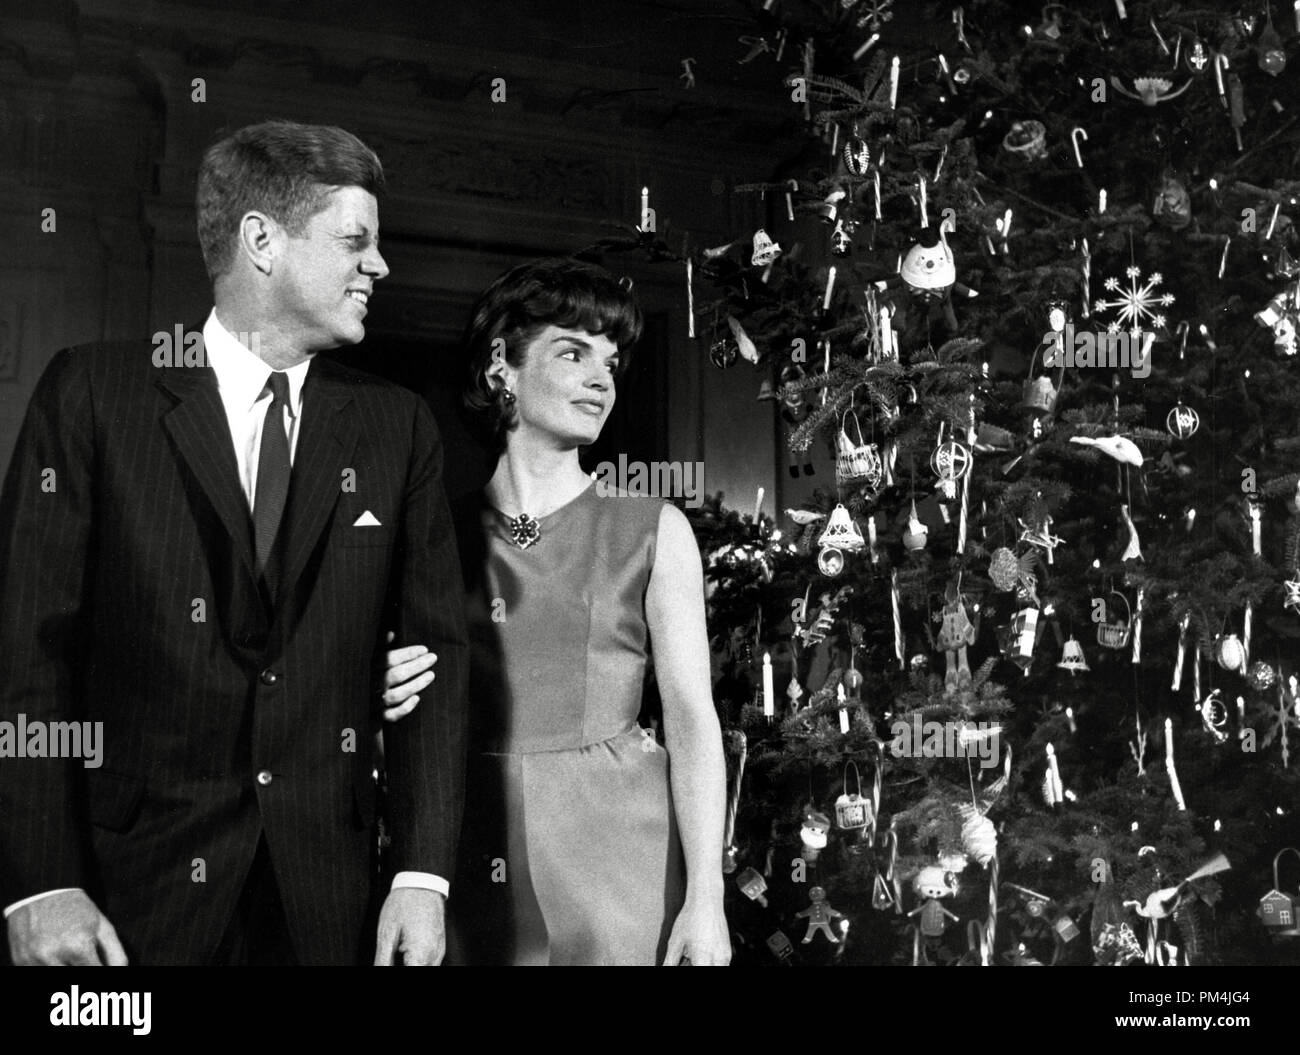 President John F. Kennedy and the First Lady Jacqueline Kennedy admire the decorated Christmas tree at the White House in Washington, December 14, 1962   File Reference # 1003 729THA Stock Photo